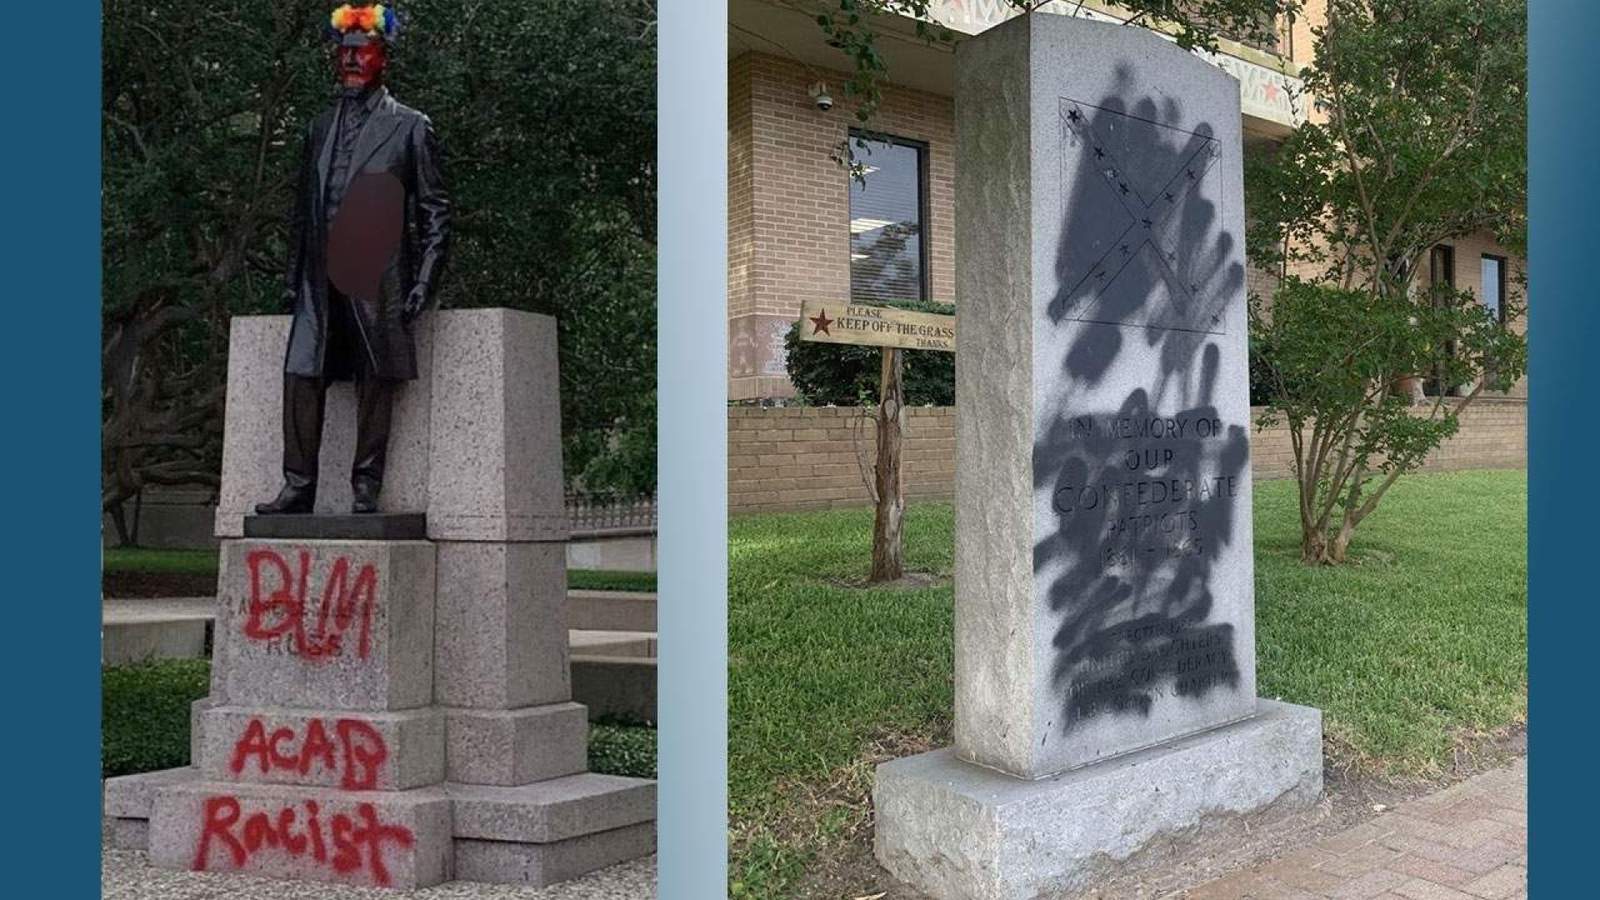 Statue of Confederate general at Texas A&M, Confederate monument in Huntsville vandalized